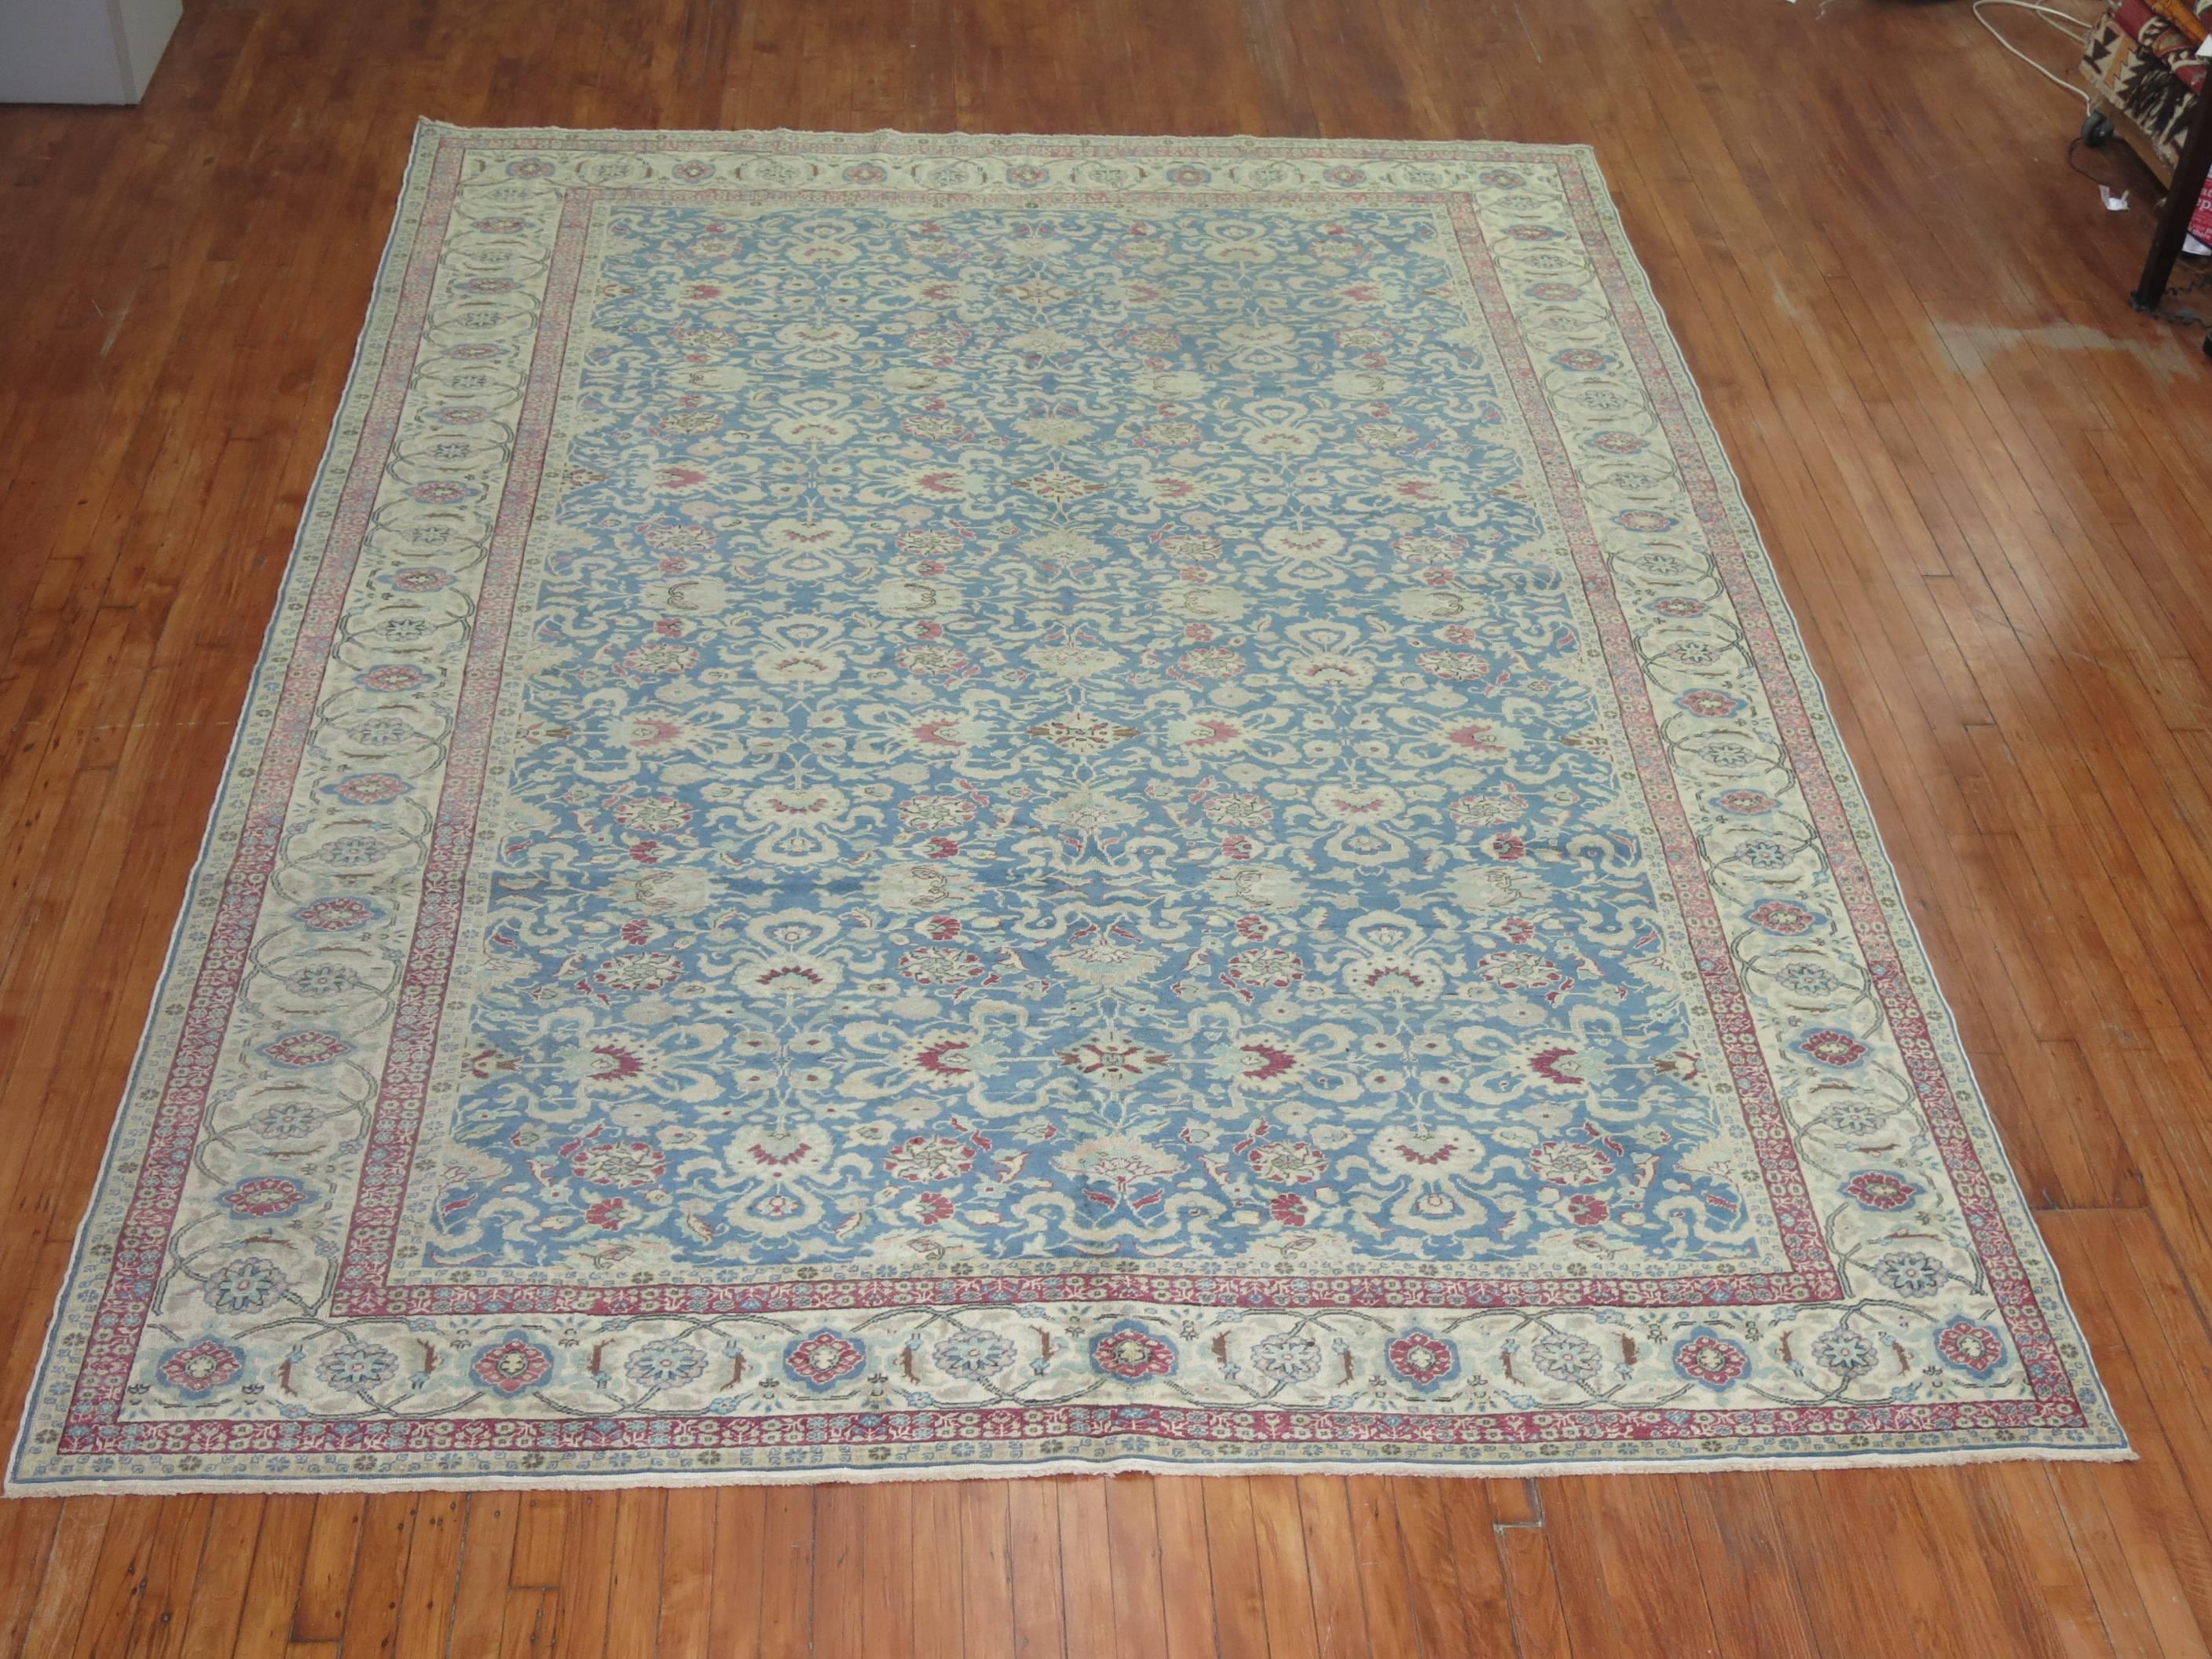 Turkish Sivas carpet with an all-over blue motif rug and ivory border.